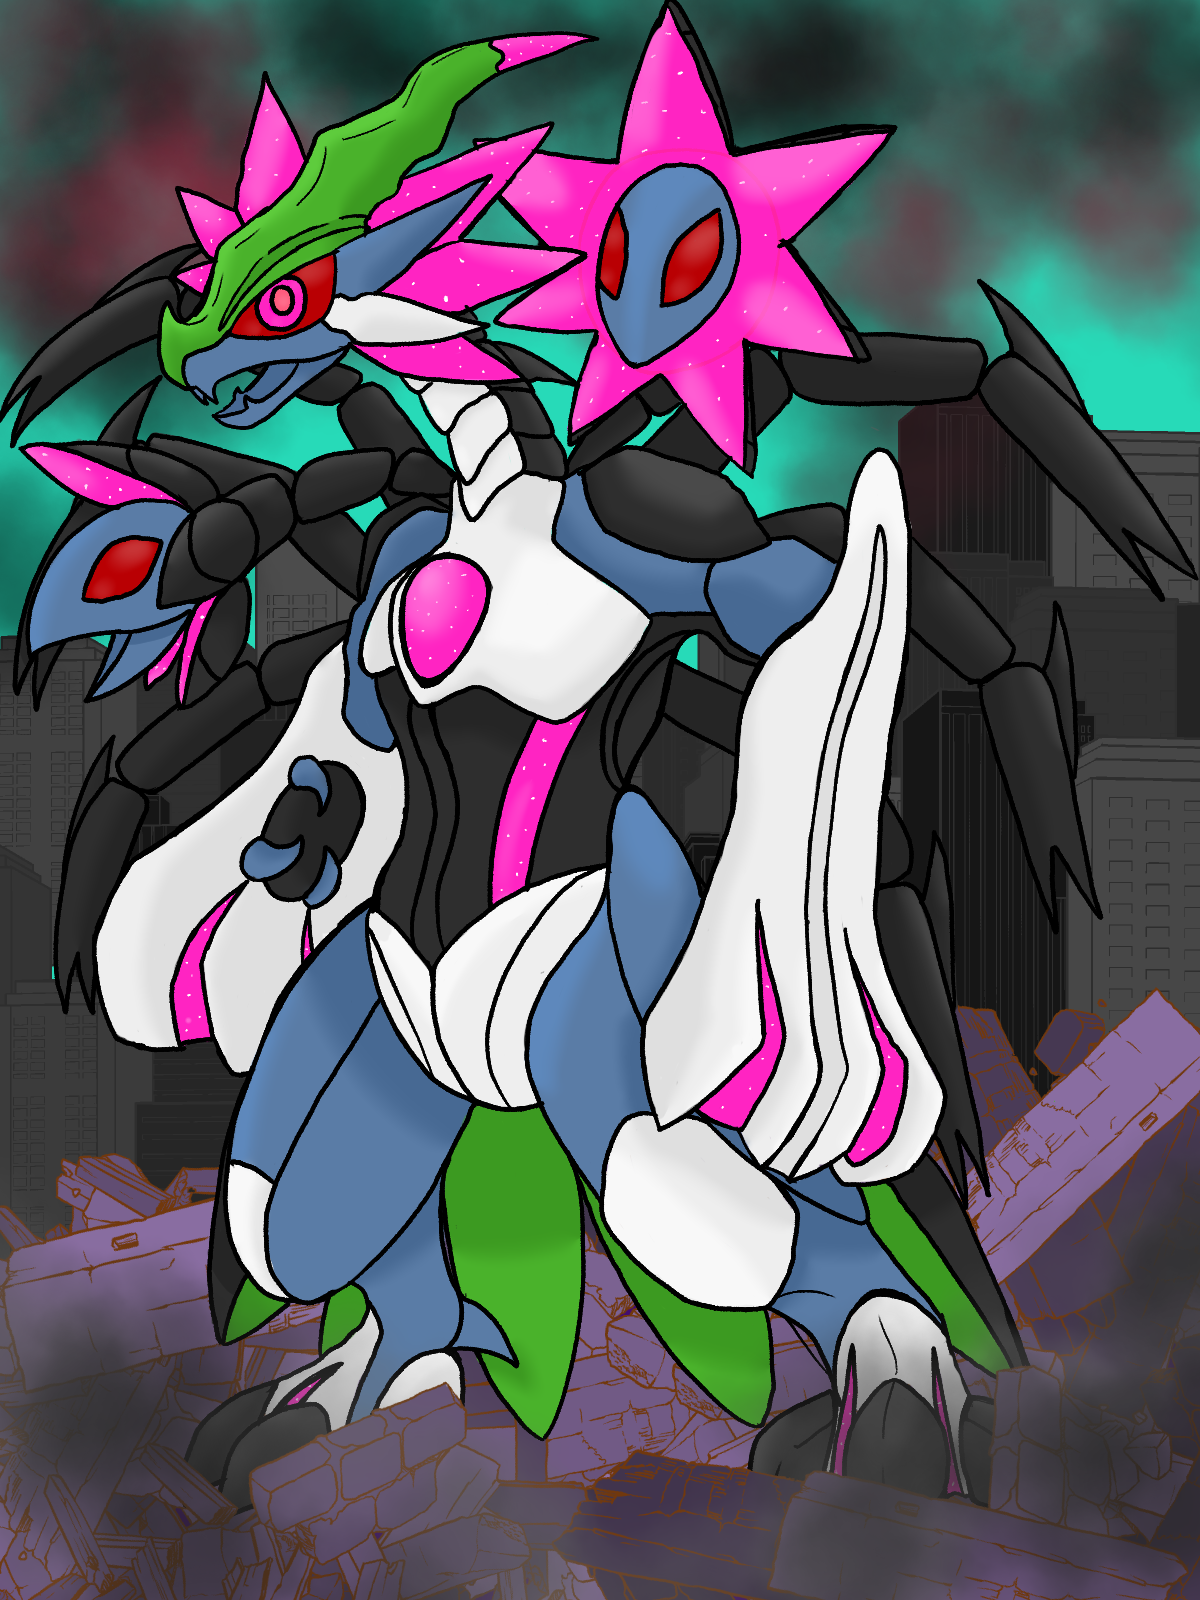 Fusions with Zekrom as head - FusionDex